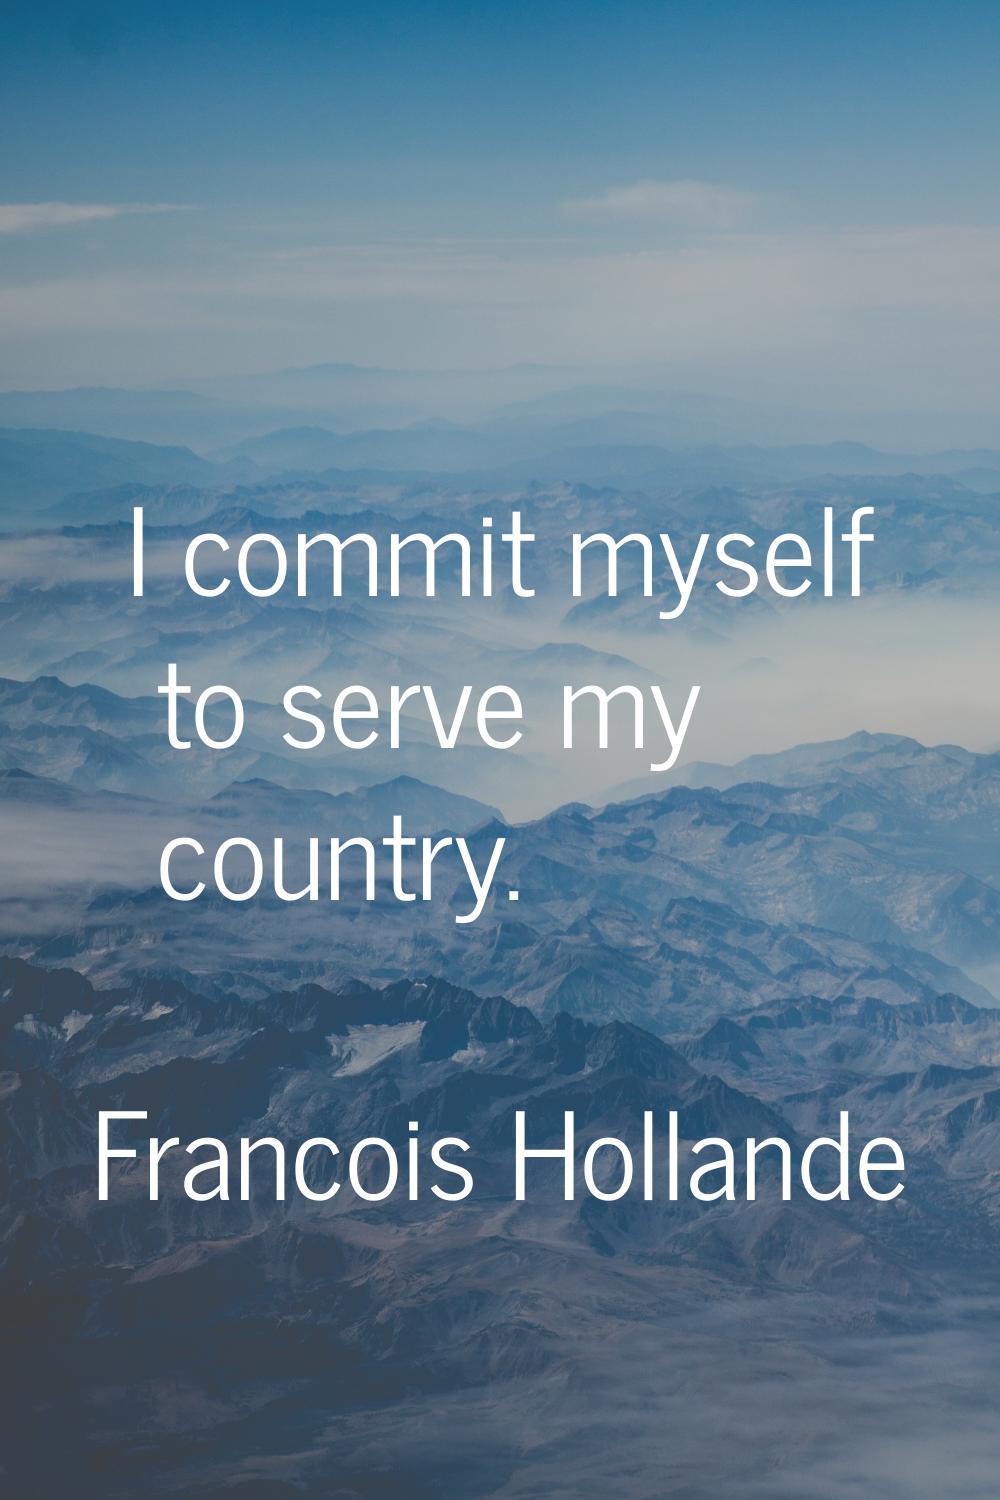 I commit myself to serve my country.